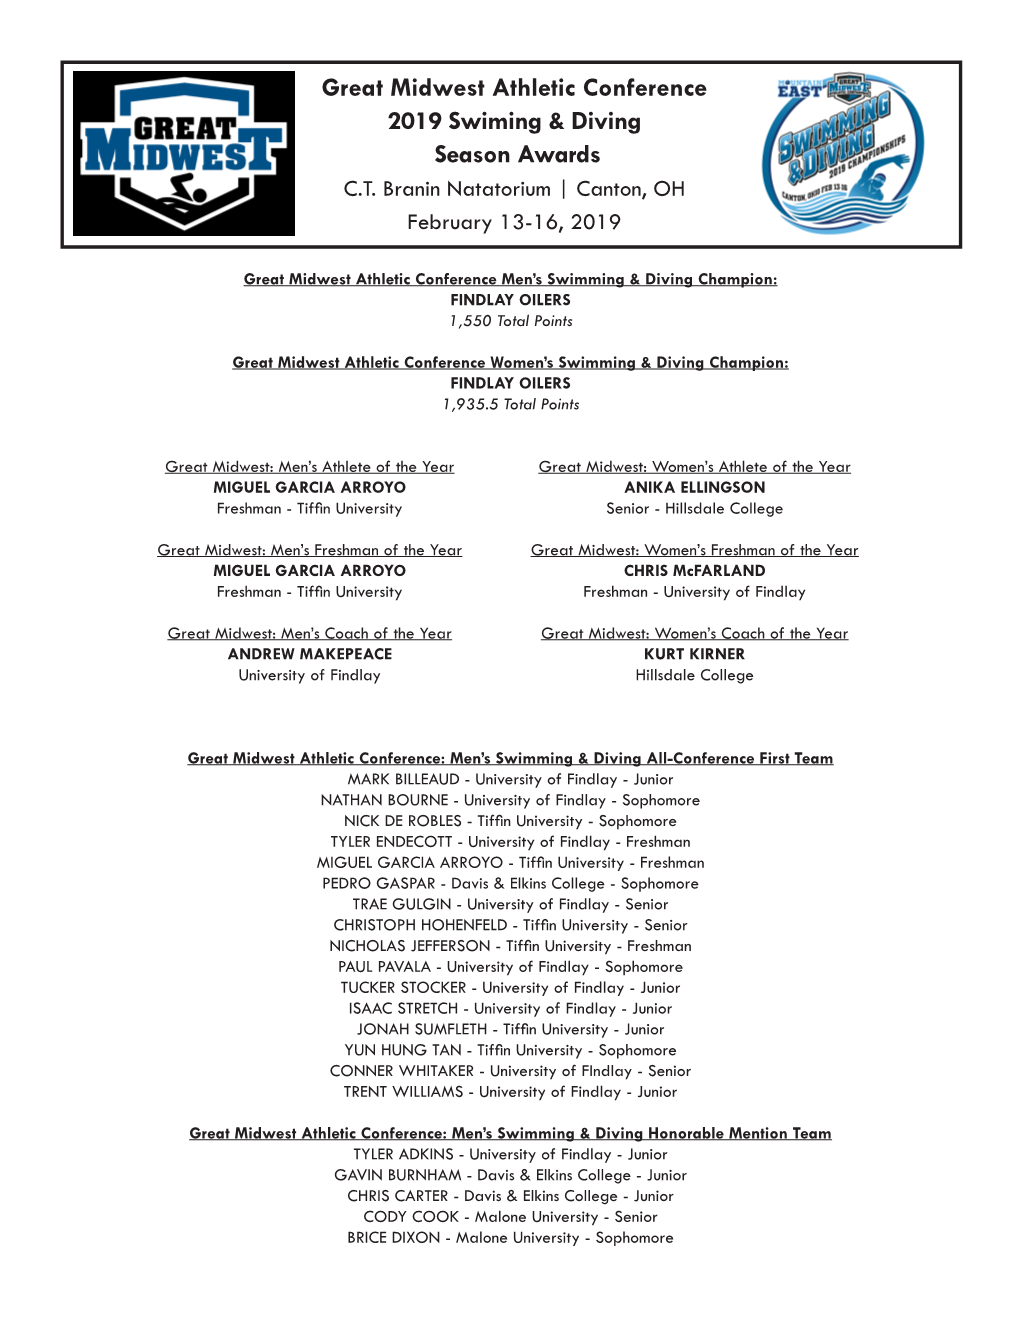 Great Midwest Athletic Conference 2019 Swiming & Diving Season Awards